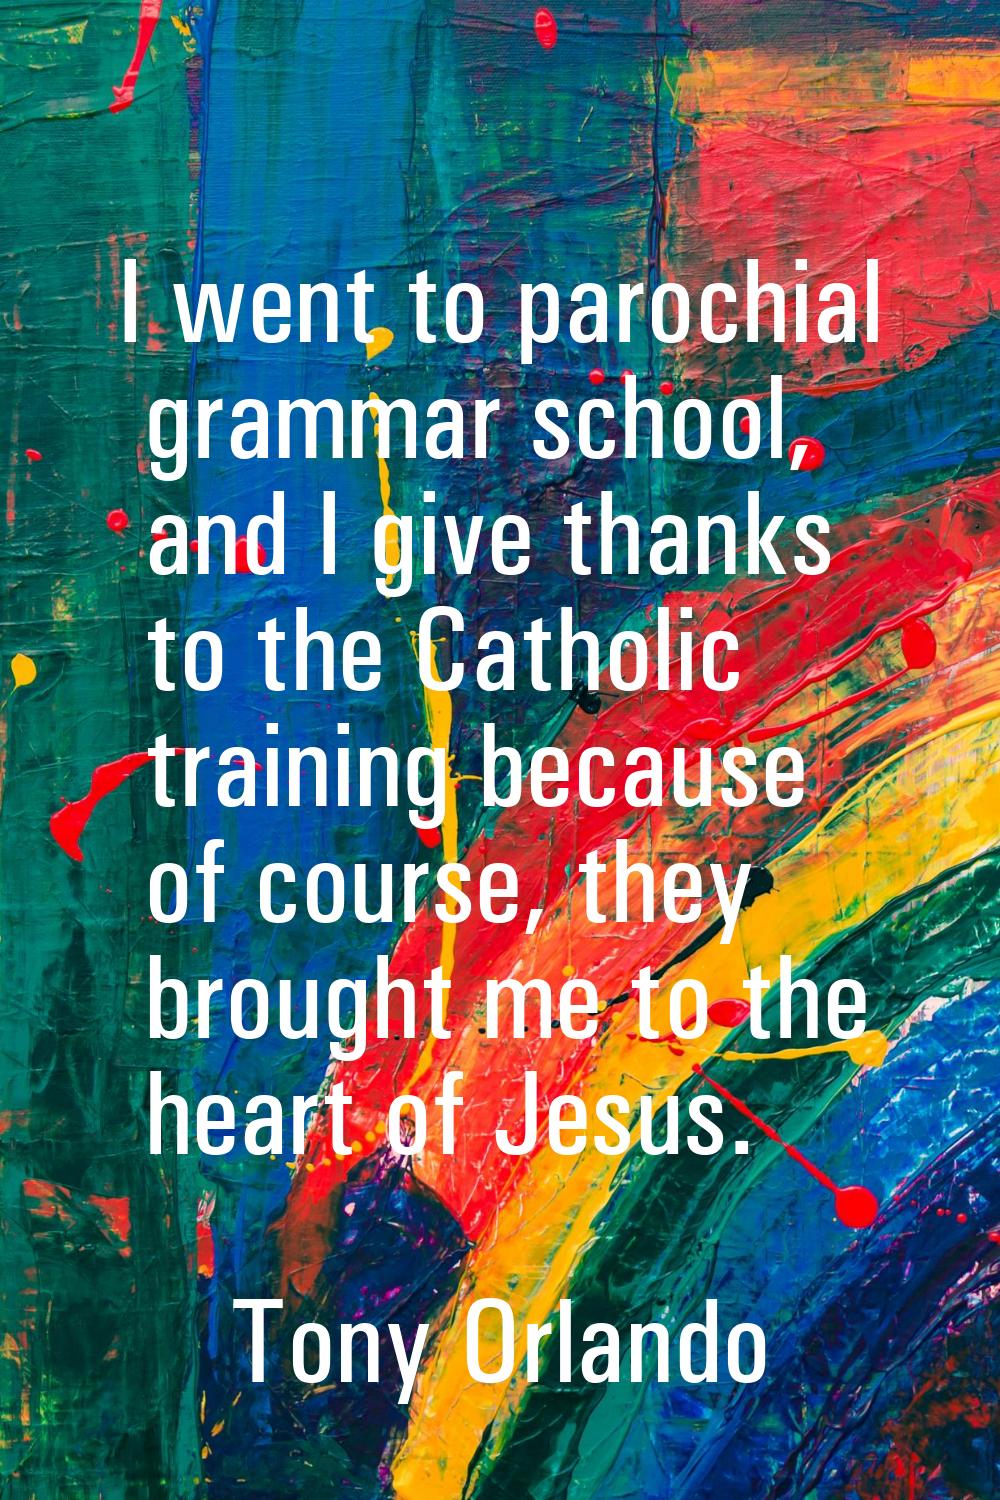 I went to parochial grammar school, and I give thanks to the Catholic training because of course, t